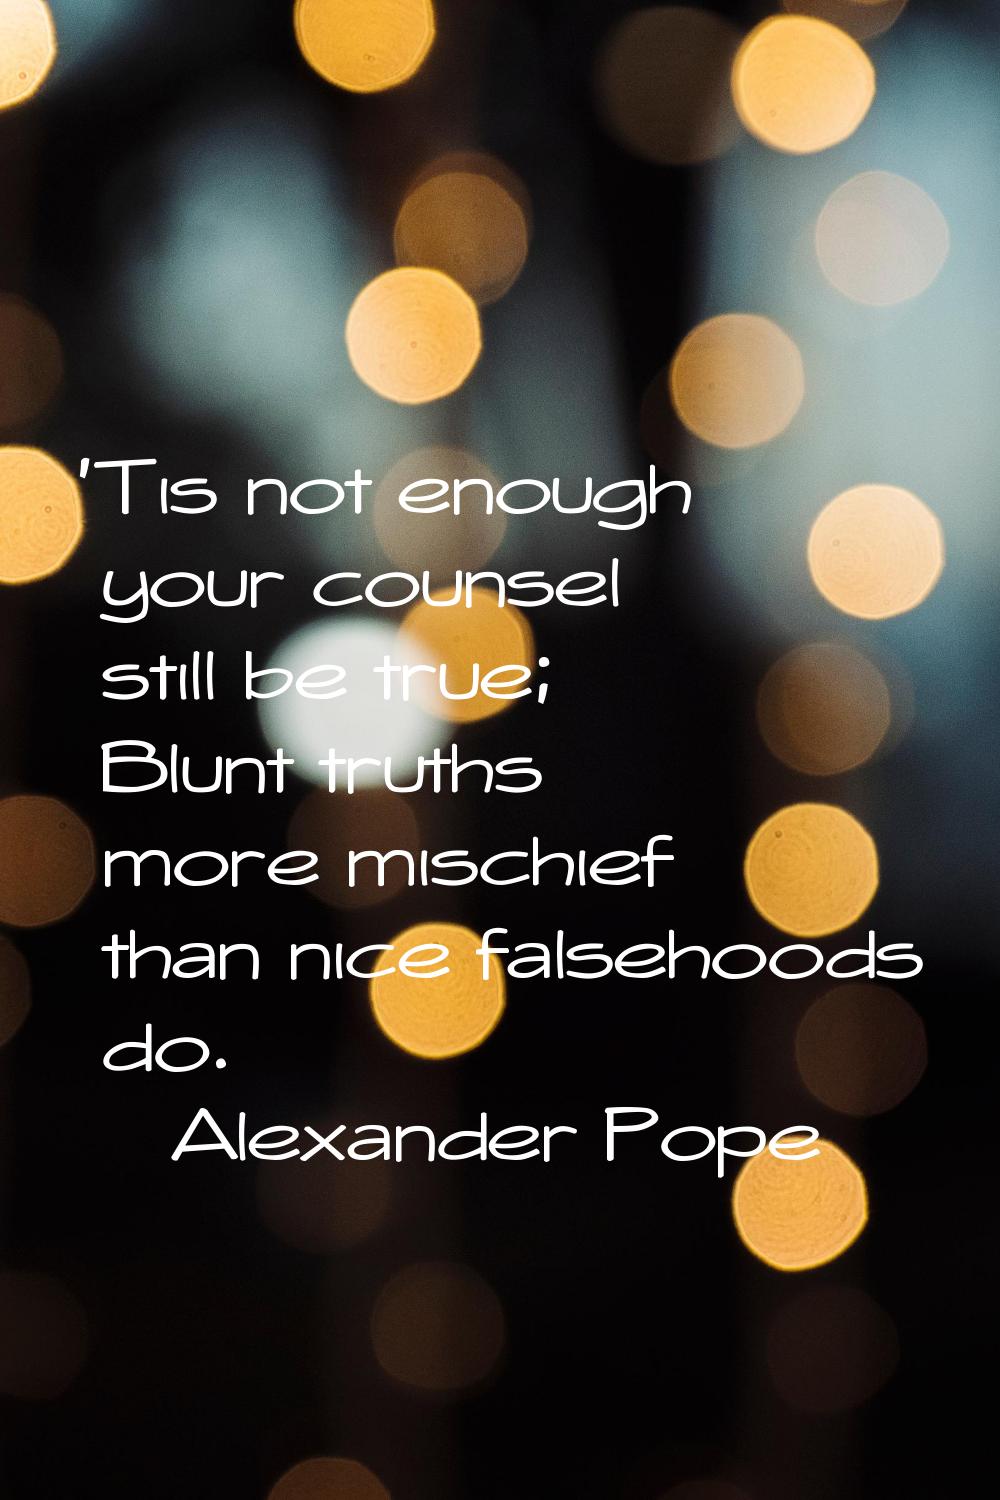 'Tis not enough your counsel still be true; Blunt truths more mischief than nice falsehoods do.